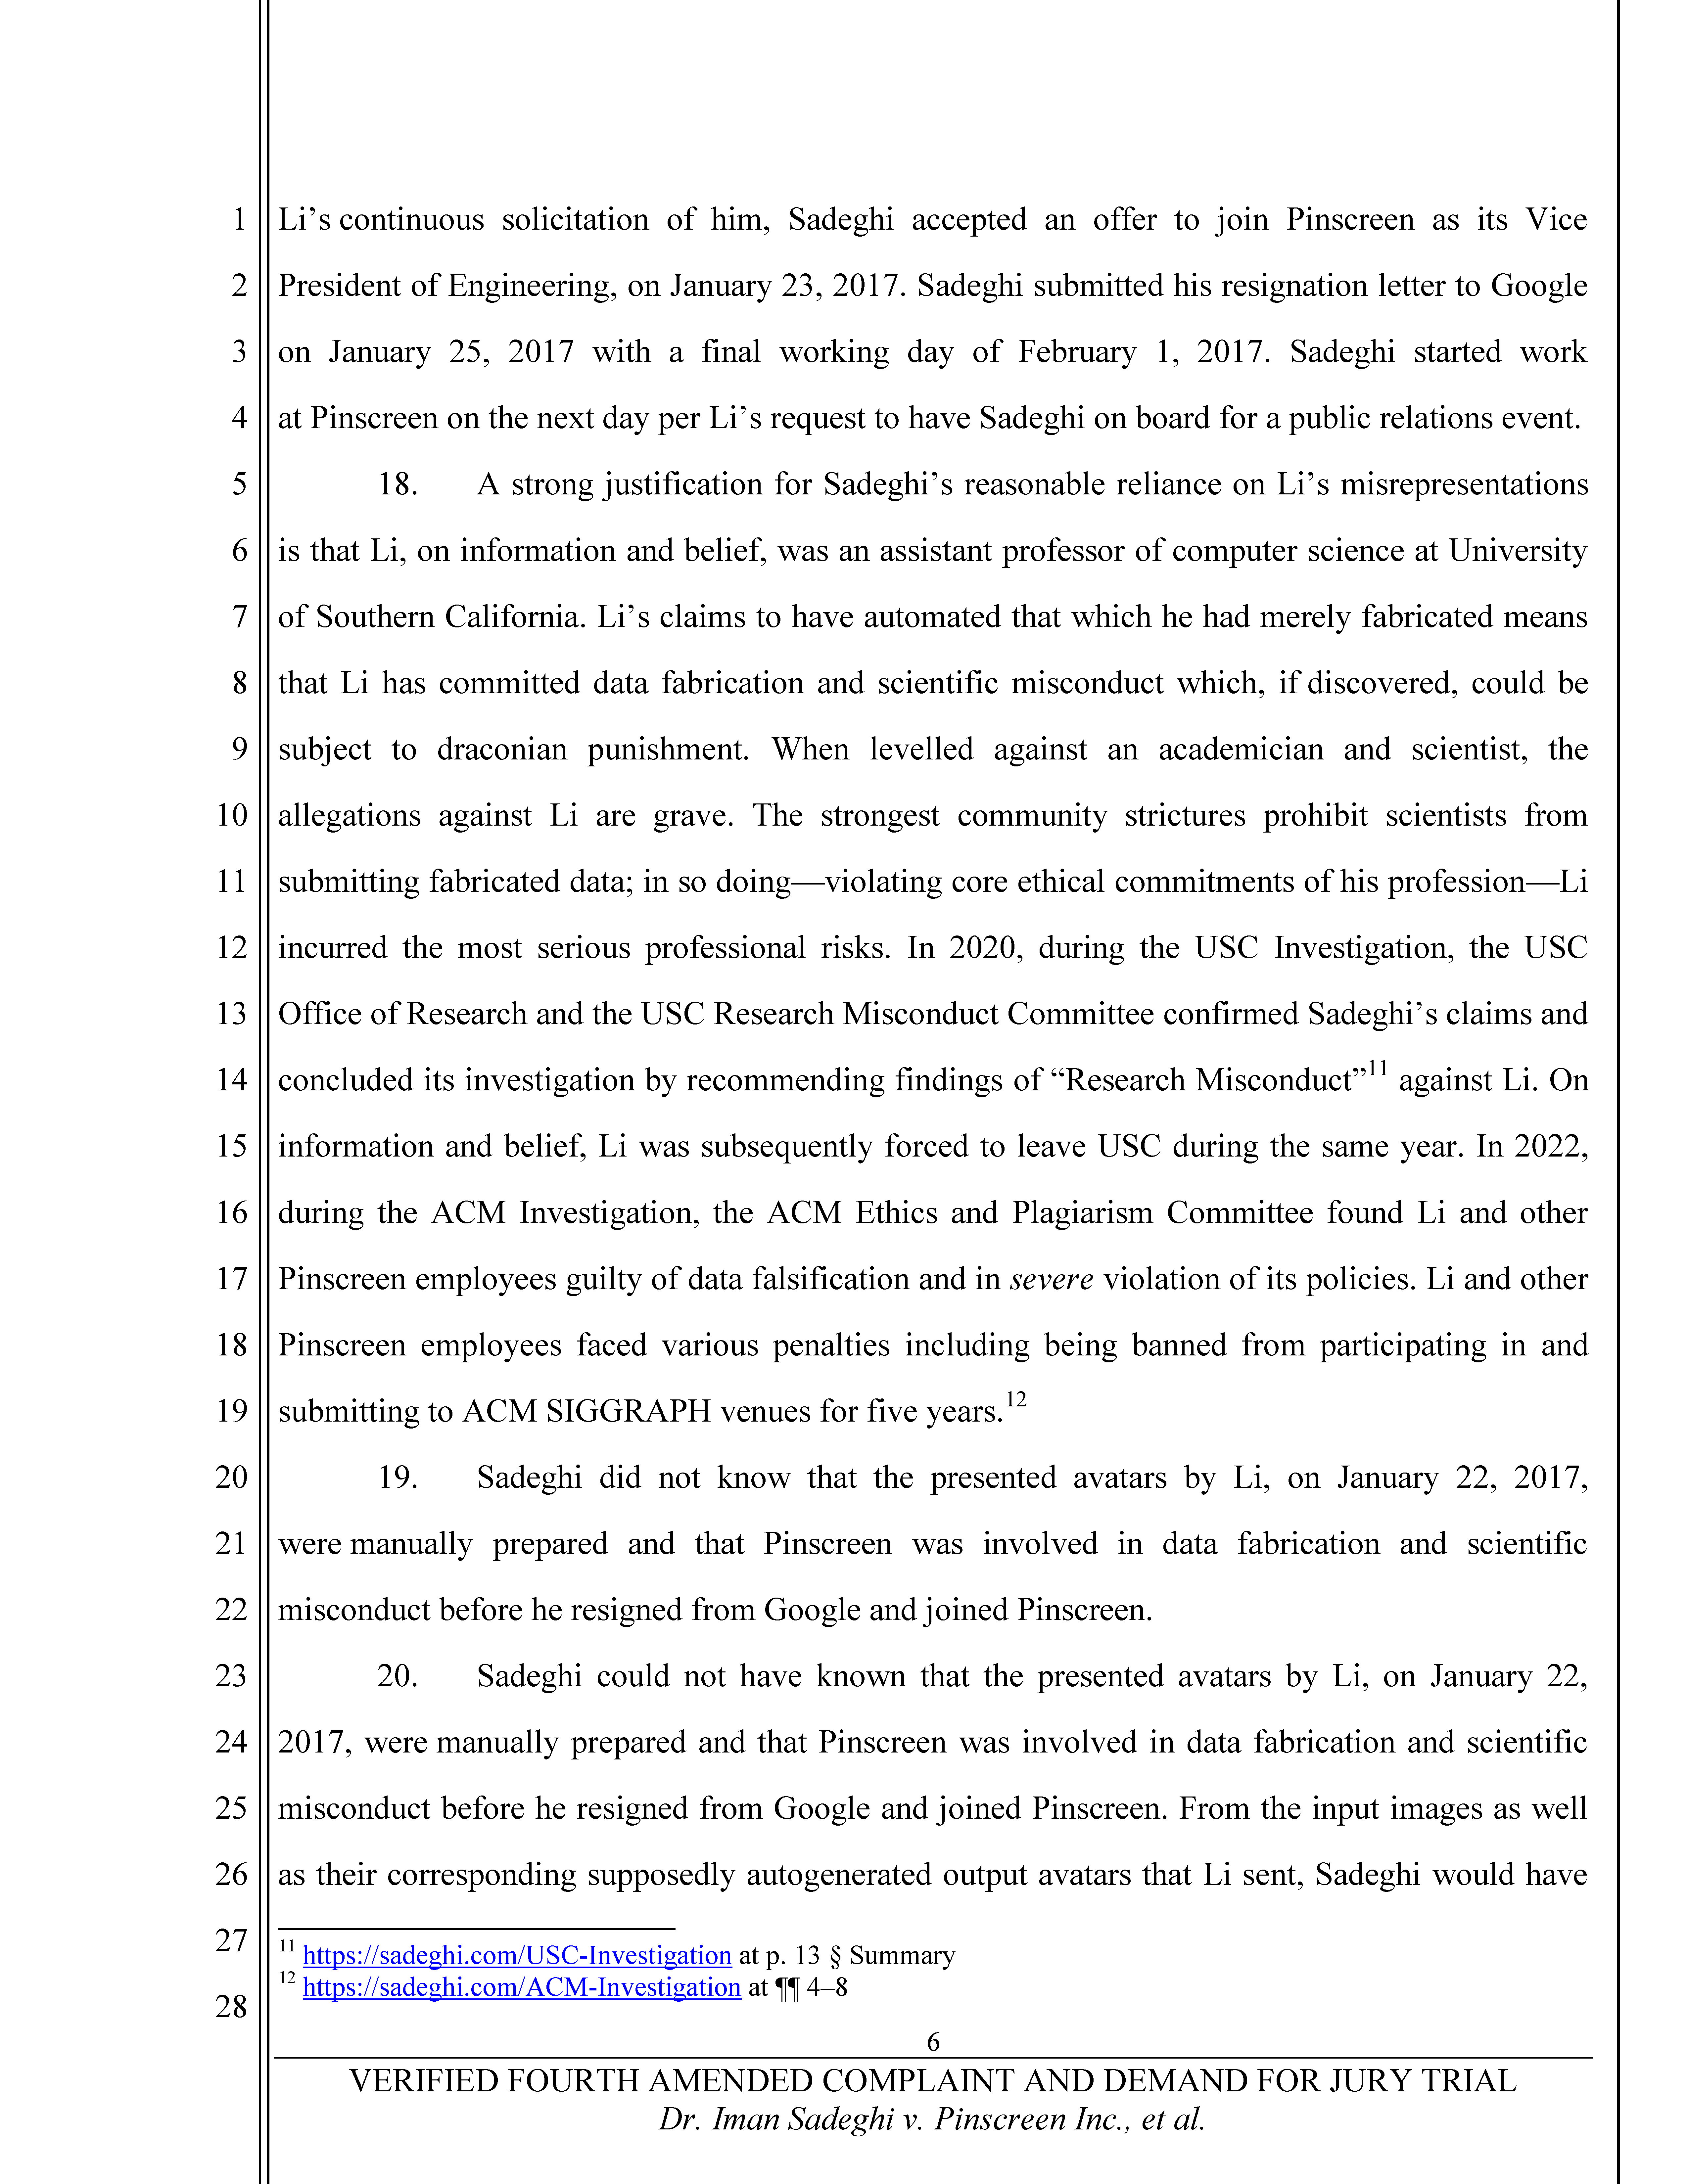 Fourth Amended Complaint (4AC) Page 7